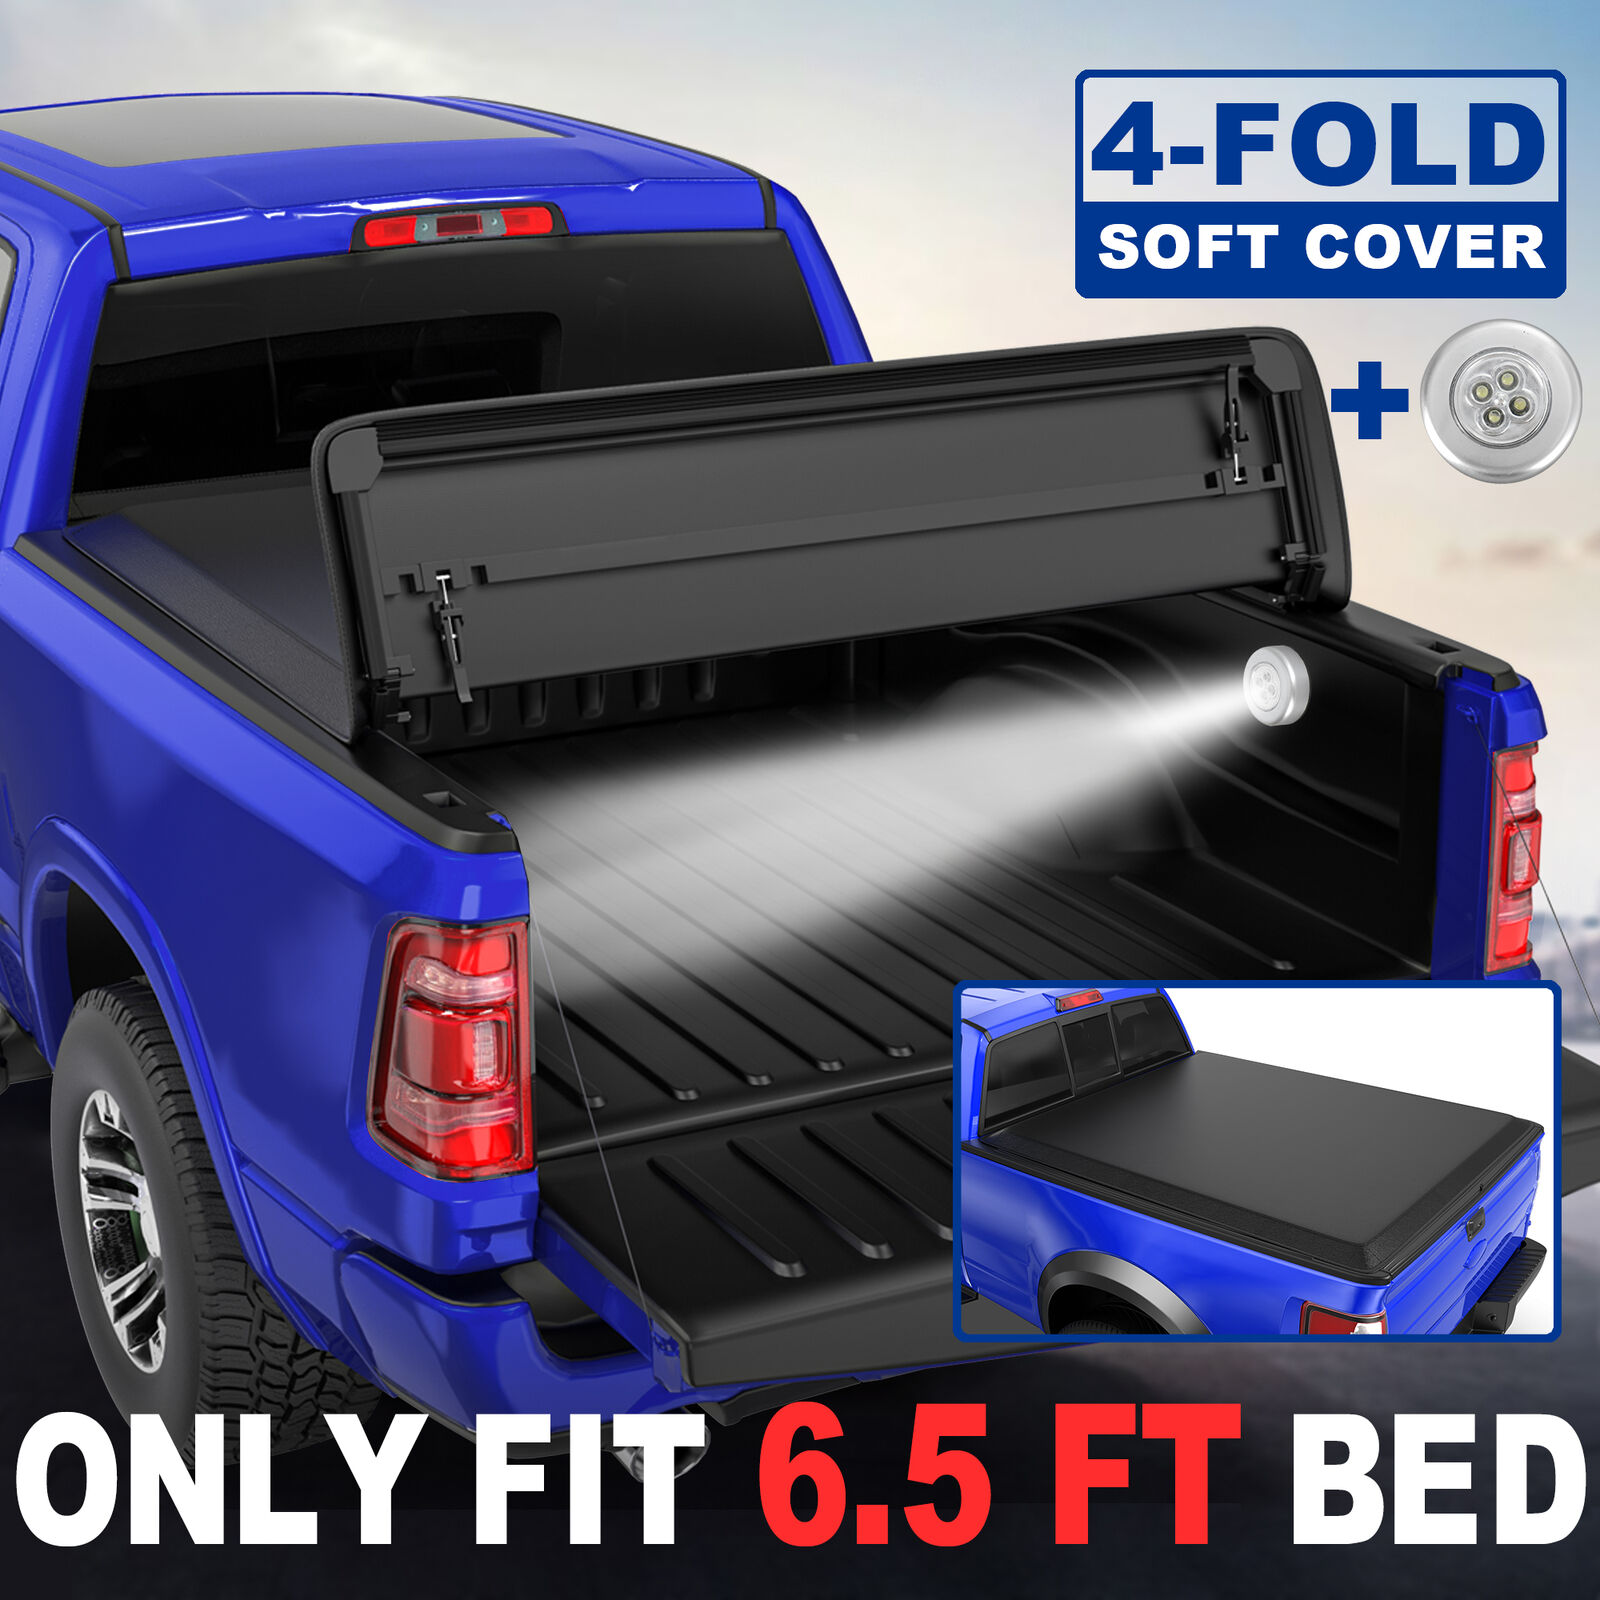 Truck Soft Tonneau Cover For 2004-2008 Ford F150 6.5 Feet Bed 4 Fold w/Led Lamp